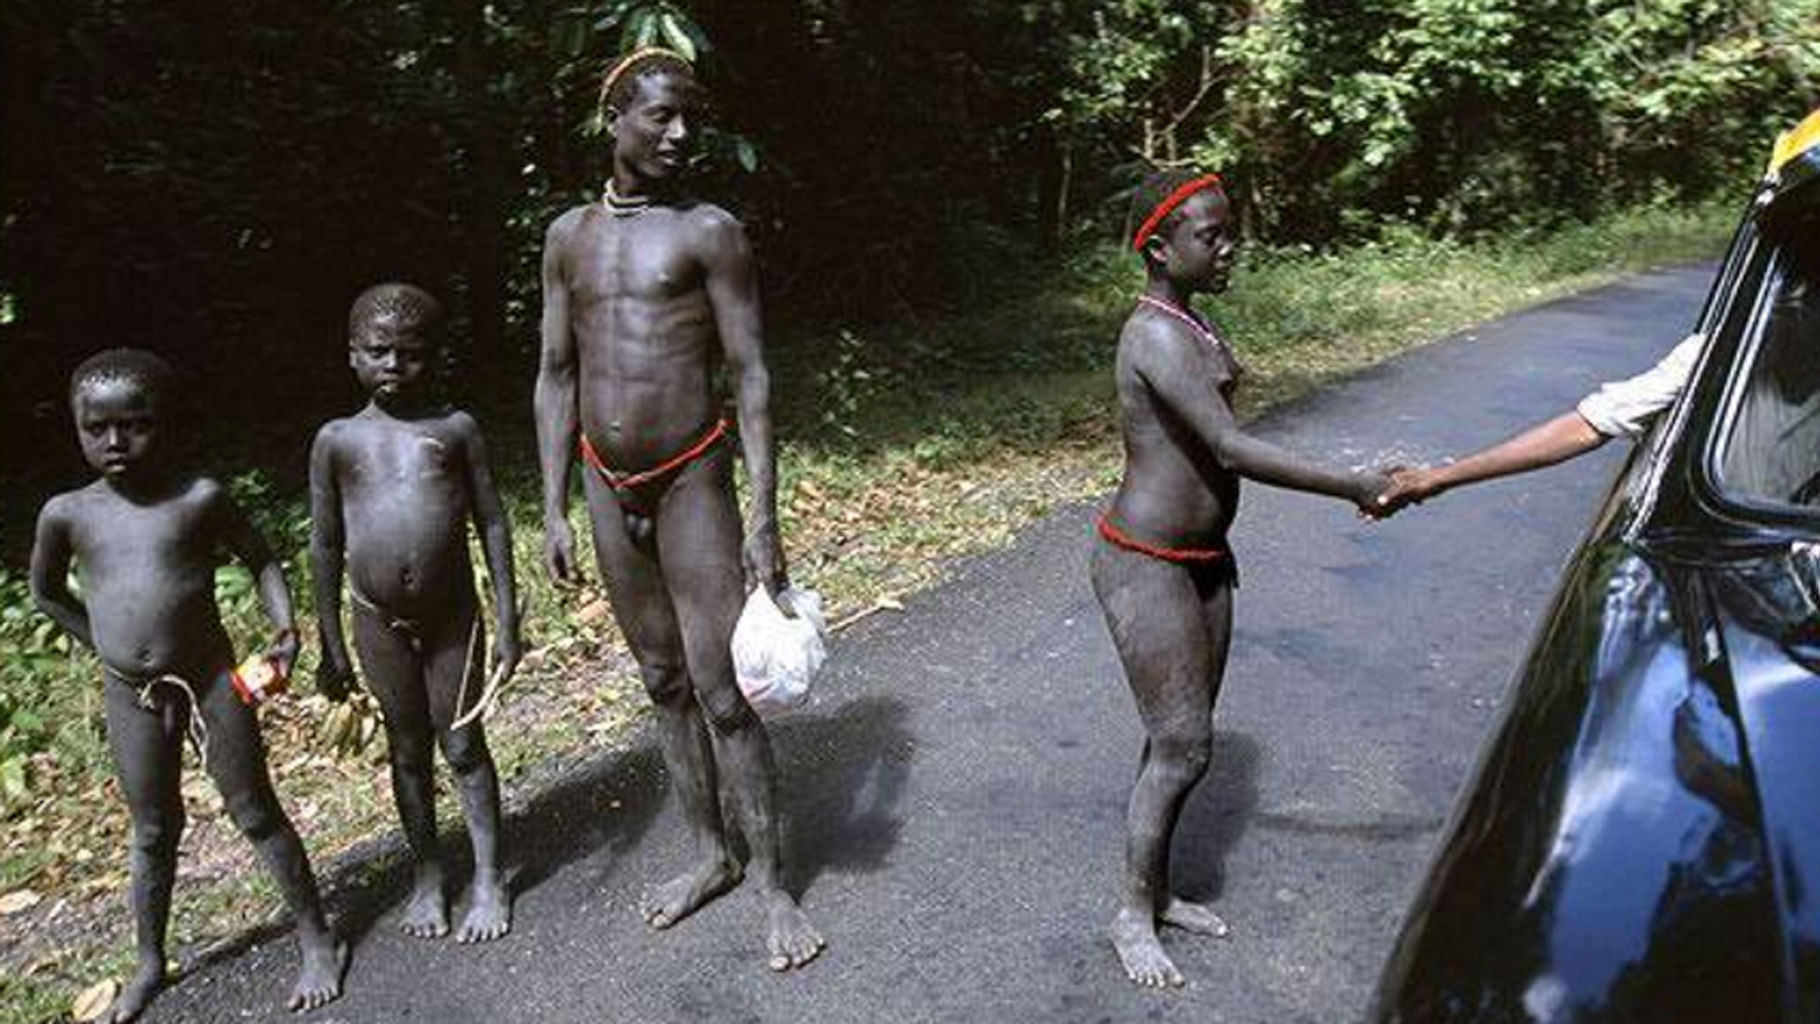 A traveller stops to interact with the intriguing, historical Jarawa tribe in the Andaman and Nicobar Islands. (Photo Courtesy: Twitter/<a href="https://twitter.com/josepalay/status/711246086866931713?lang=en">Josep Alay</a>)